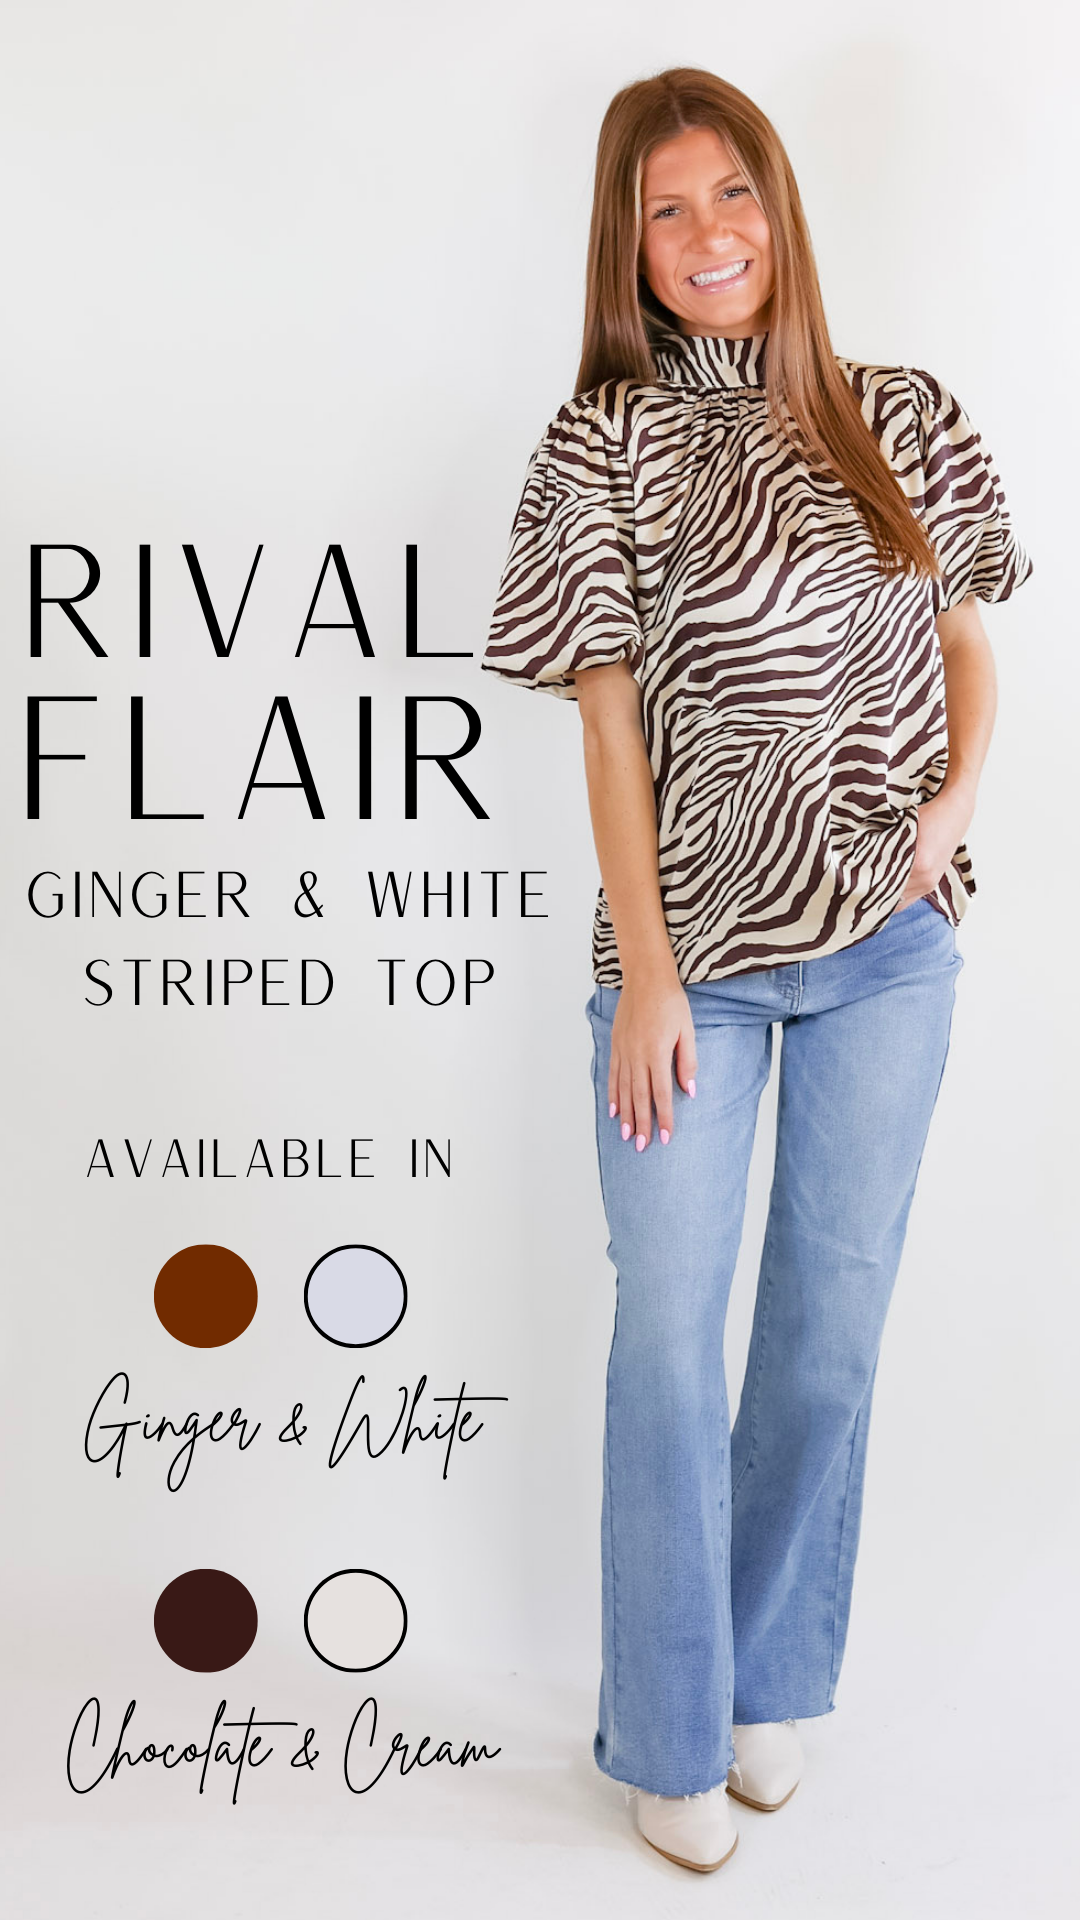 Rival Flair Zebra Print Top with Mock Neck in Chocolate Brown and Cream - Giddy Up Glamour Boutique